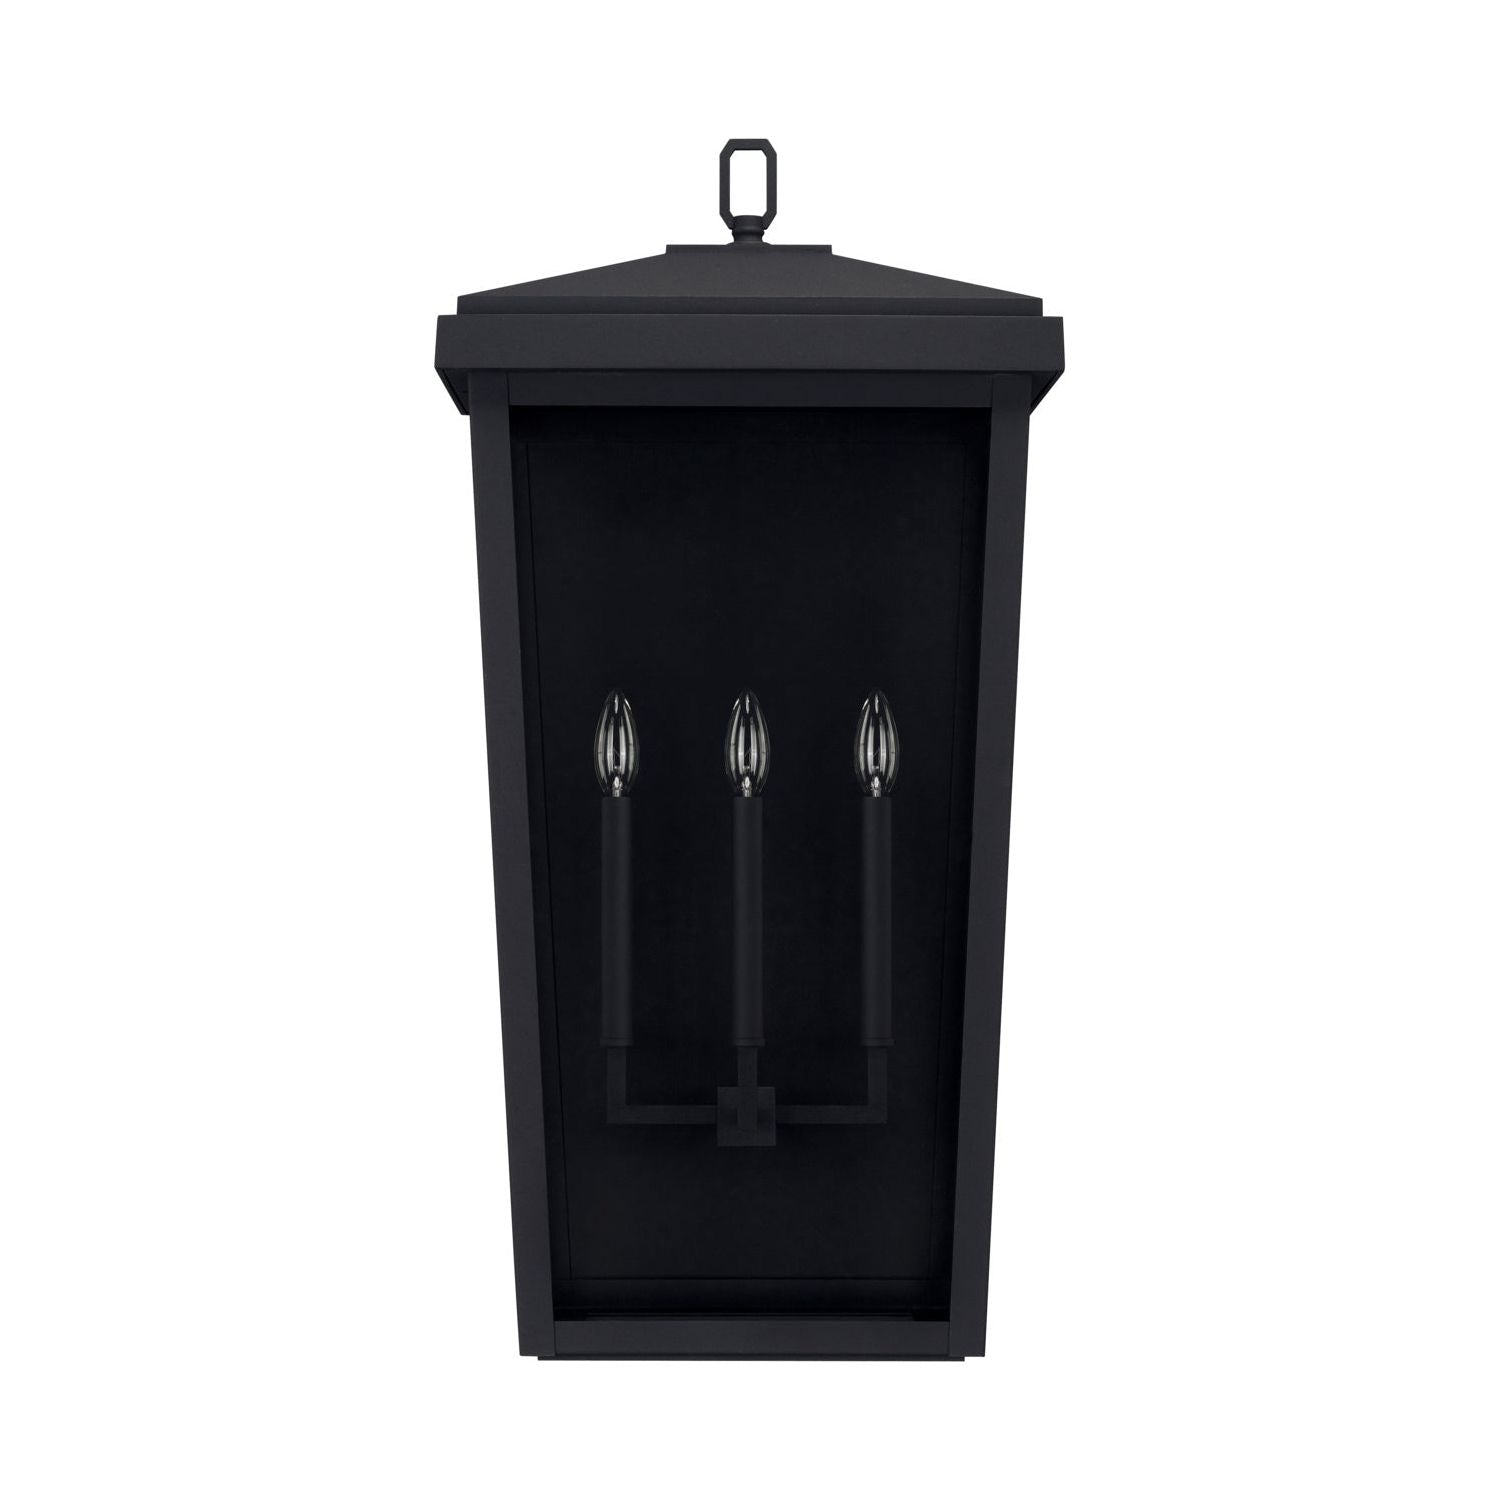 Donnelly 3-Light Outdoor Wall Lantern